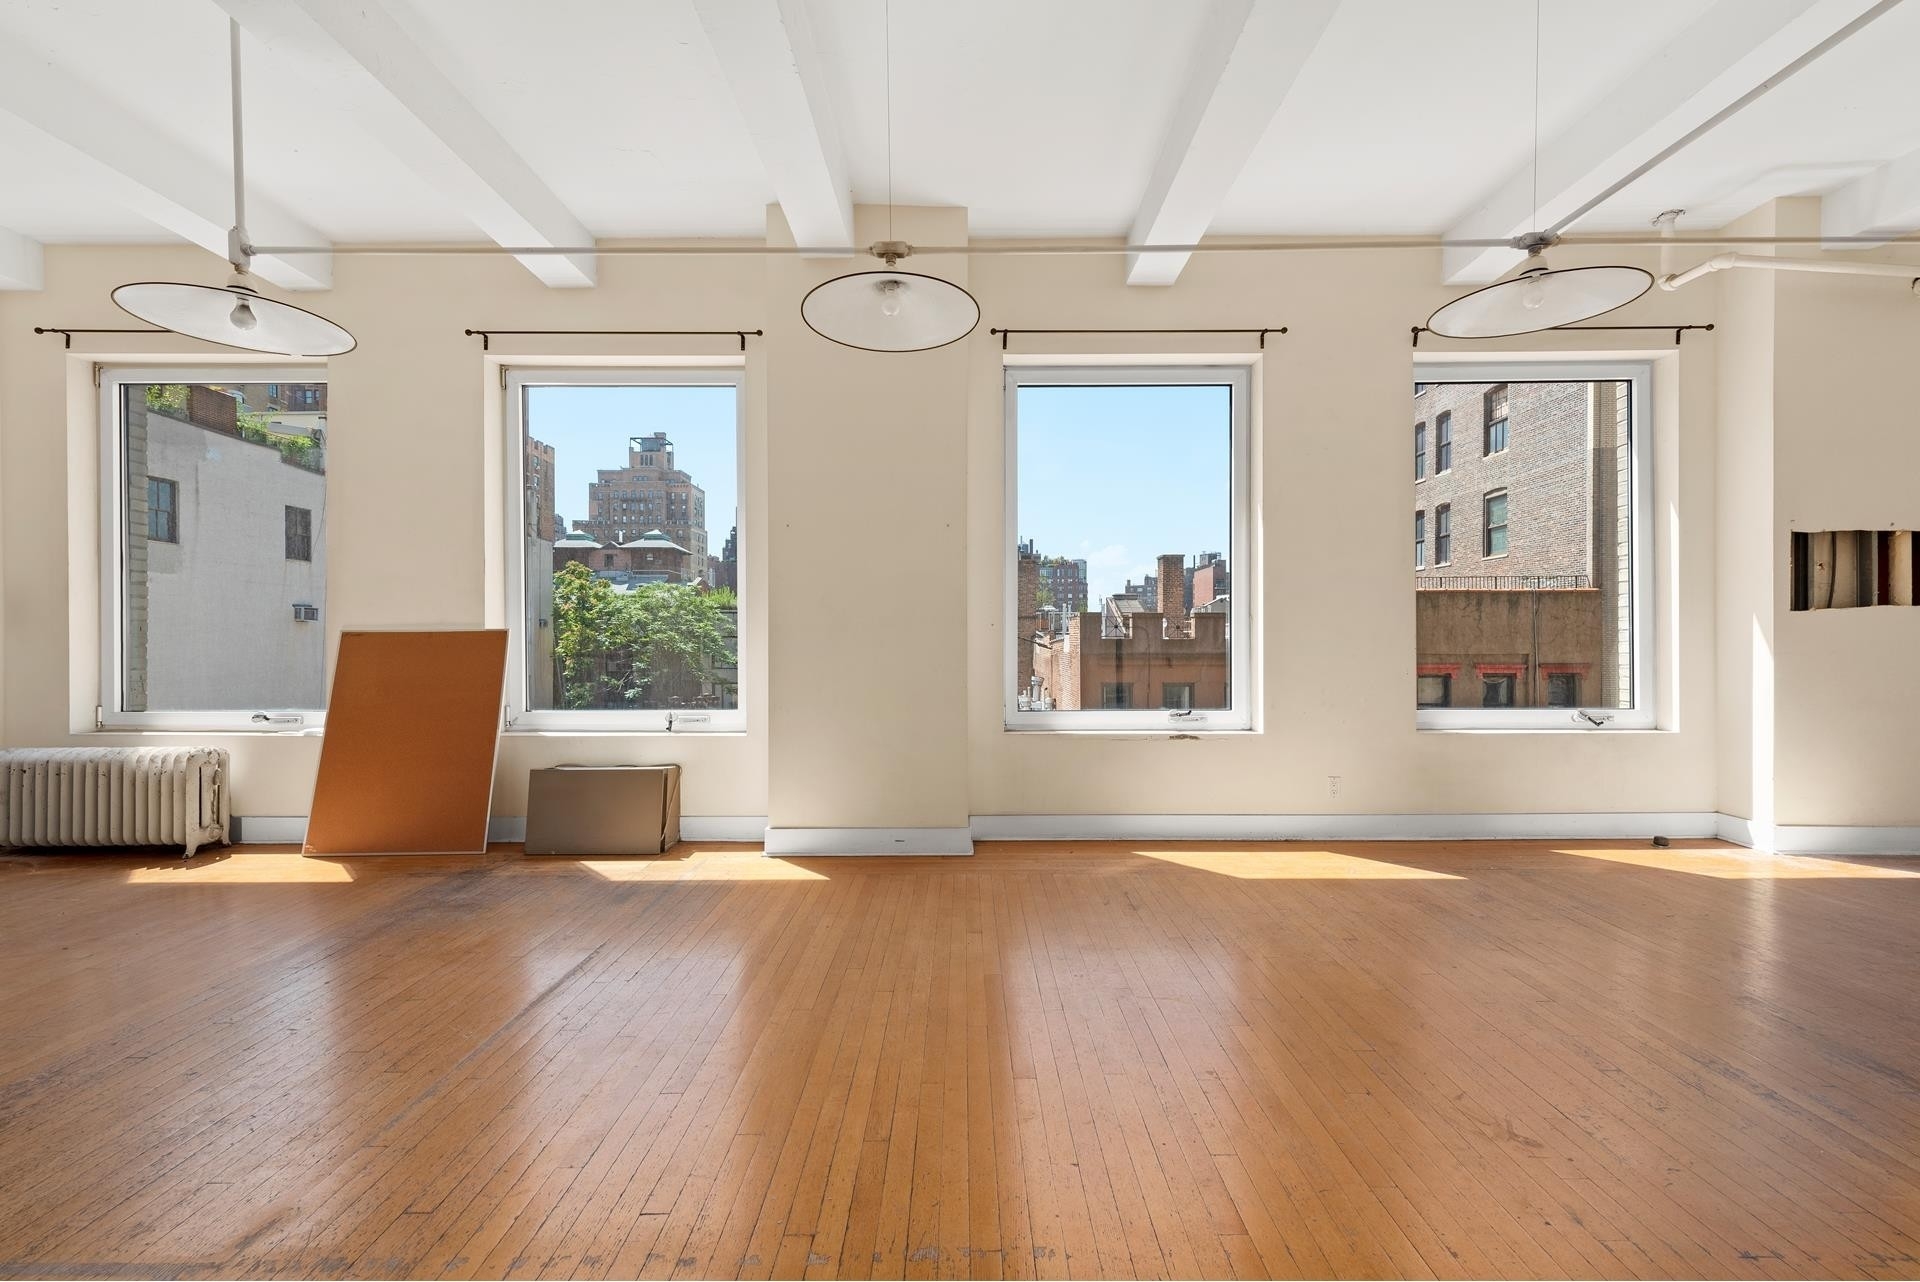 4. Co-op Properties for Sale at 227 W 17TH ST, 5 Chelsea, New York, NY 10011